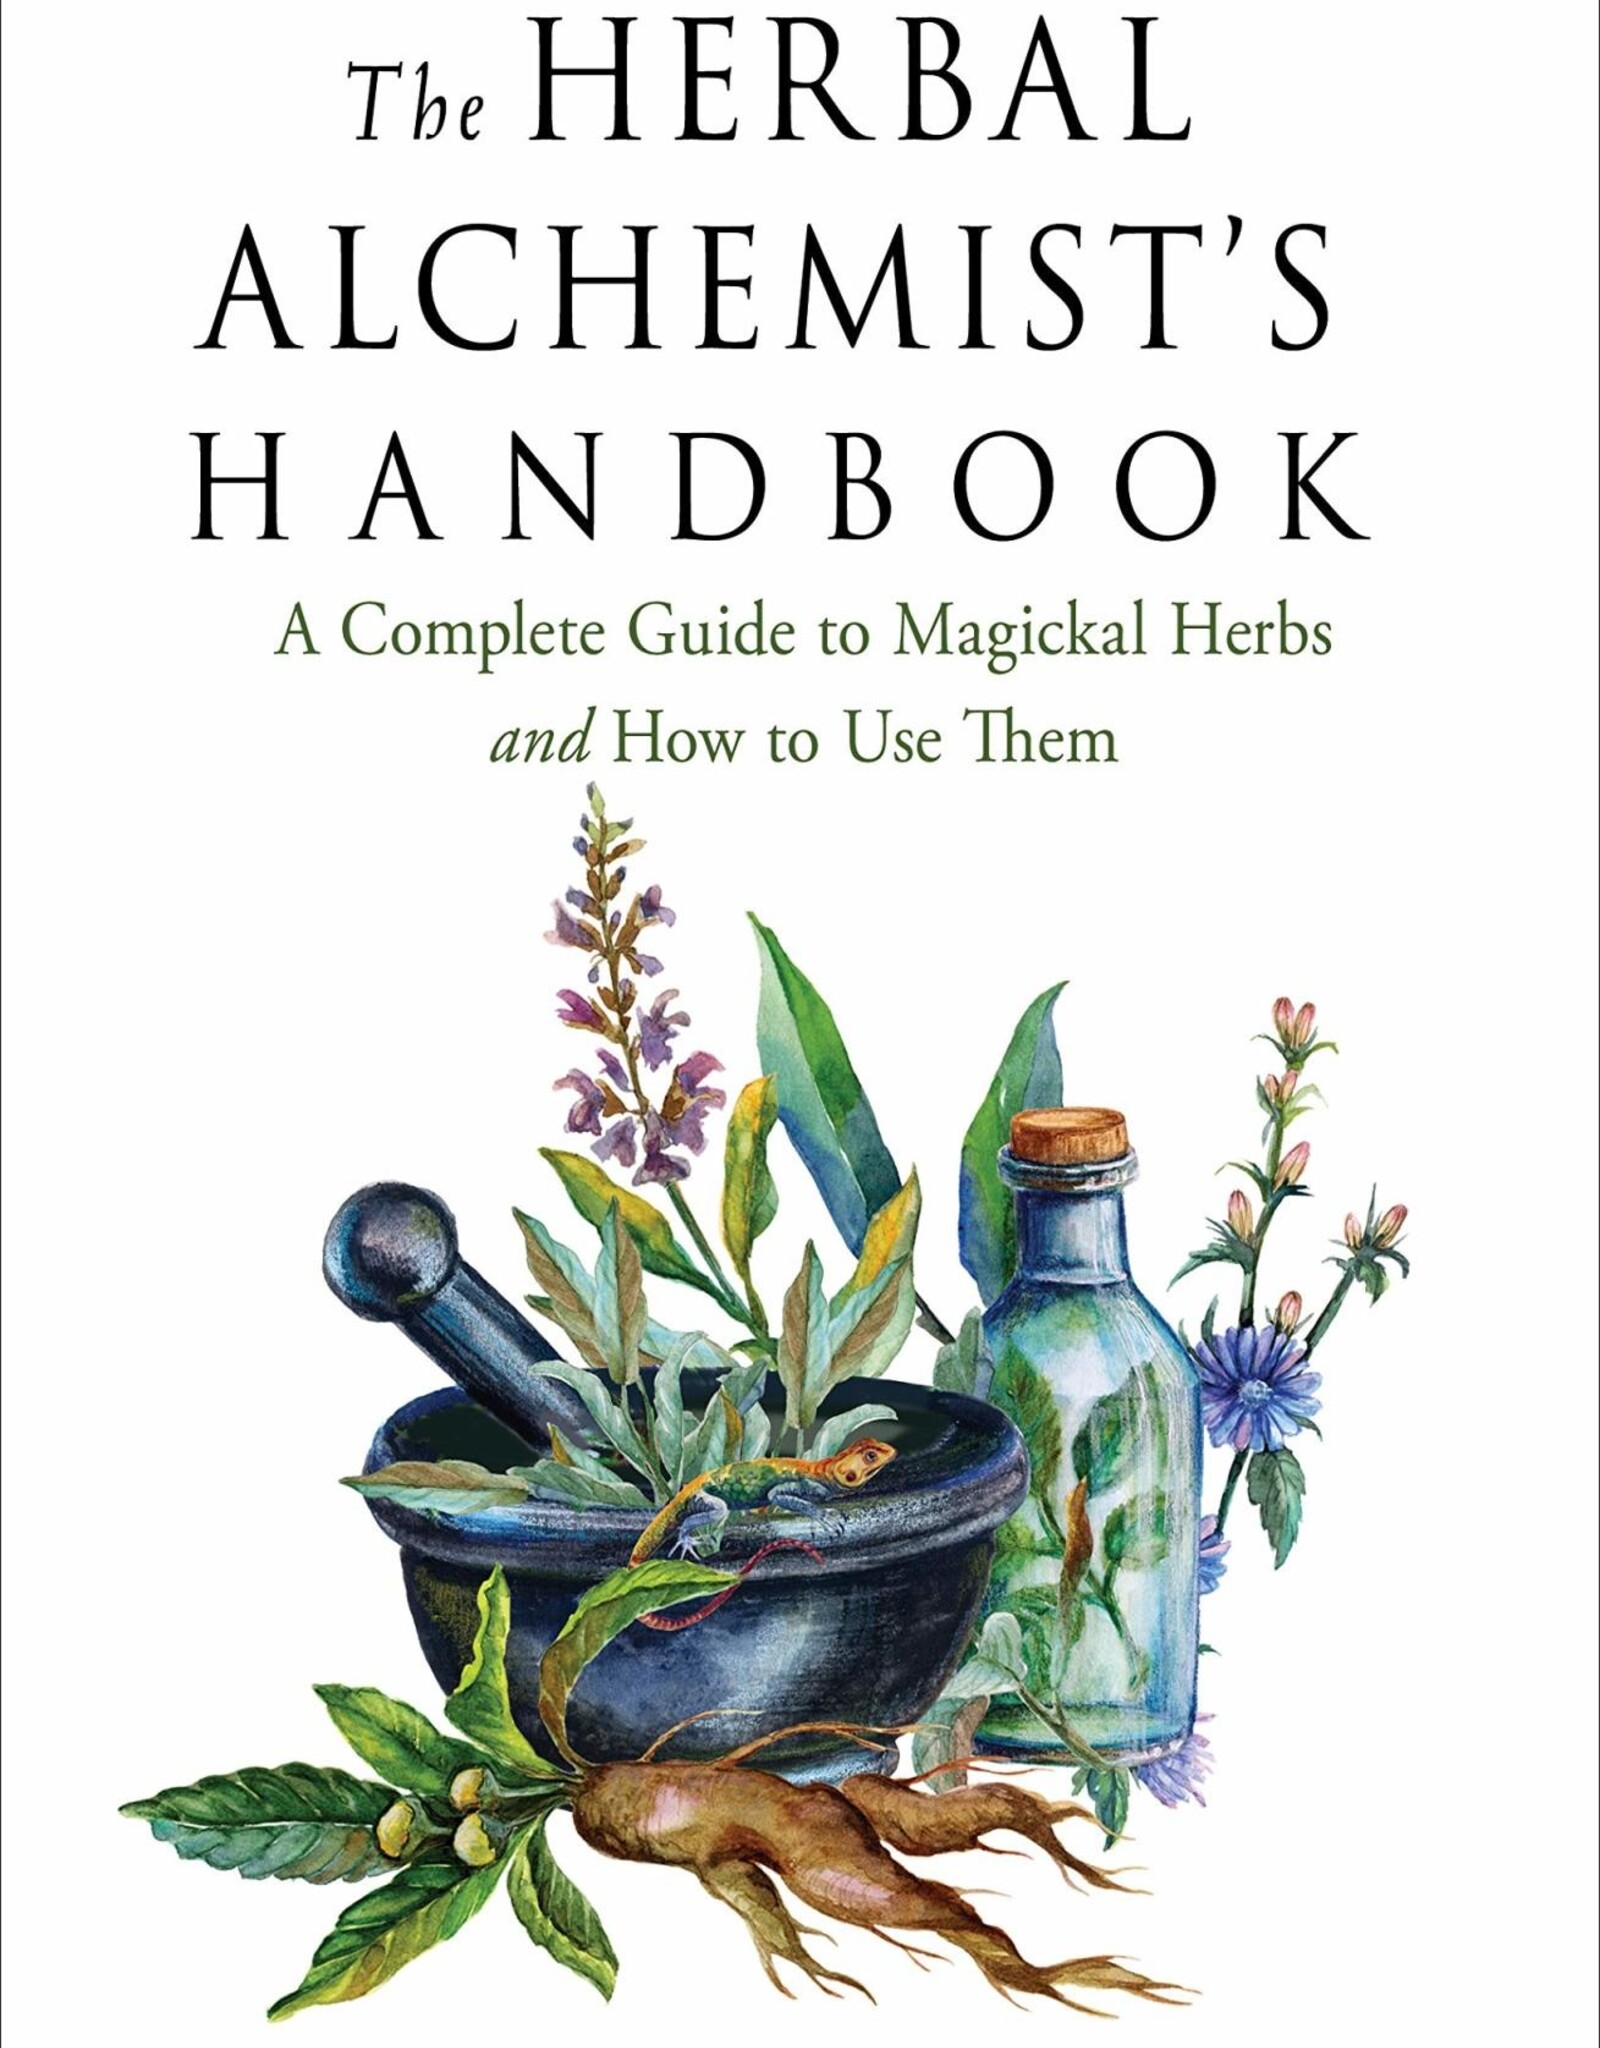 The Herbal Alchemist’s Handbook: A Complete Guide to Magickal Herbs and How to Use Them